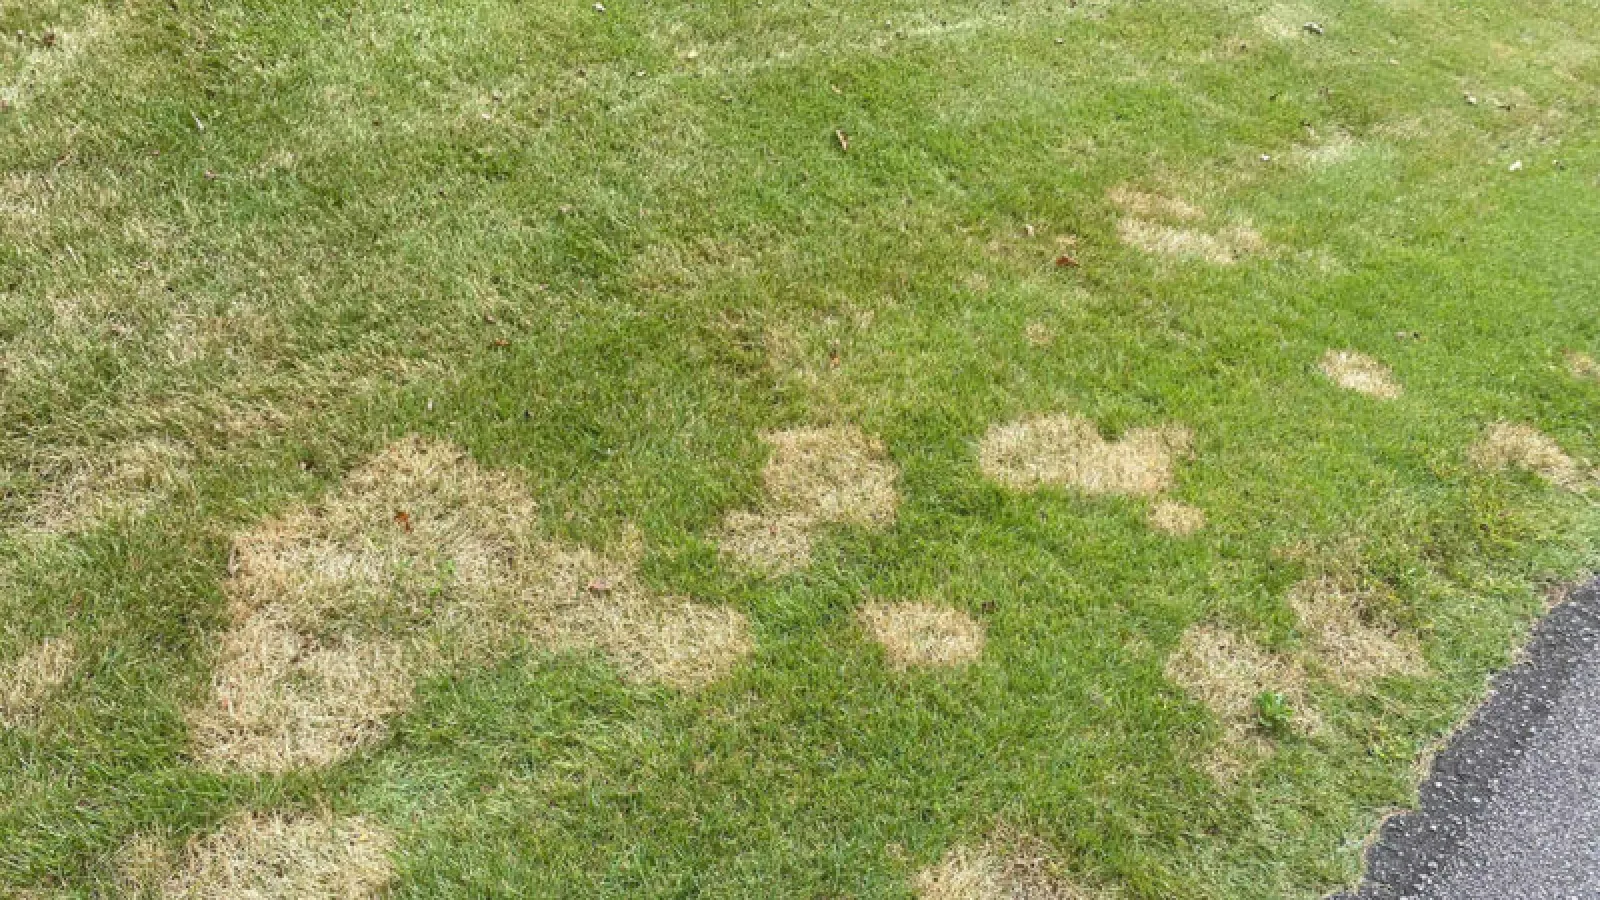 Don’t Let Zoysia Patch Fungus Take Hold In Your Lawn